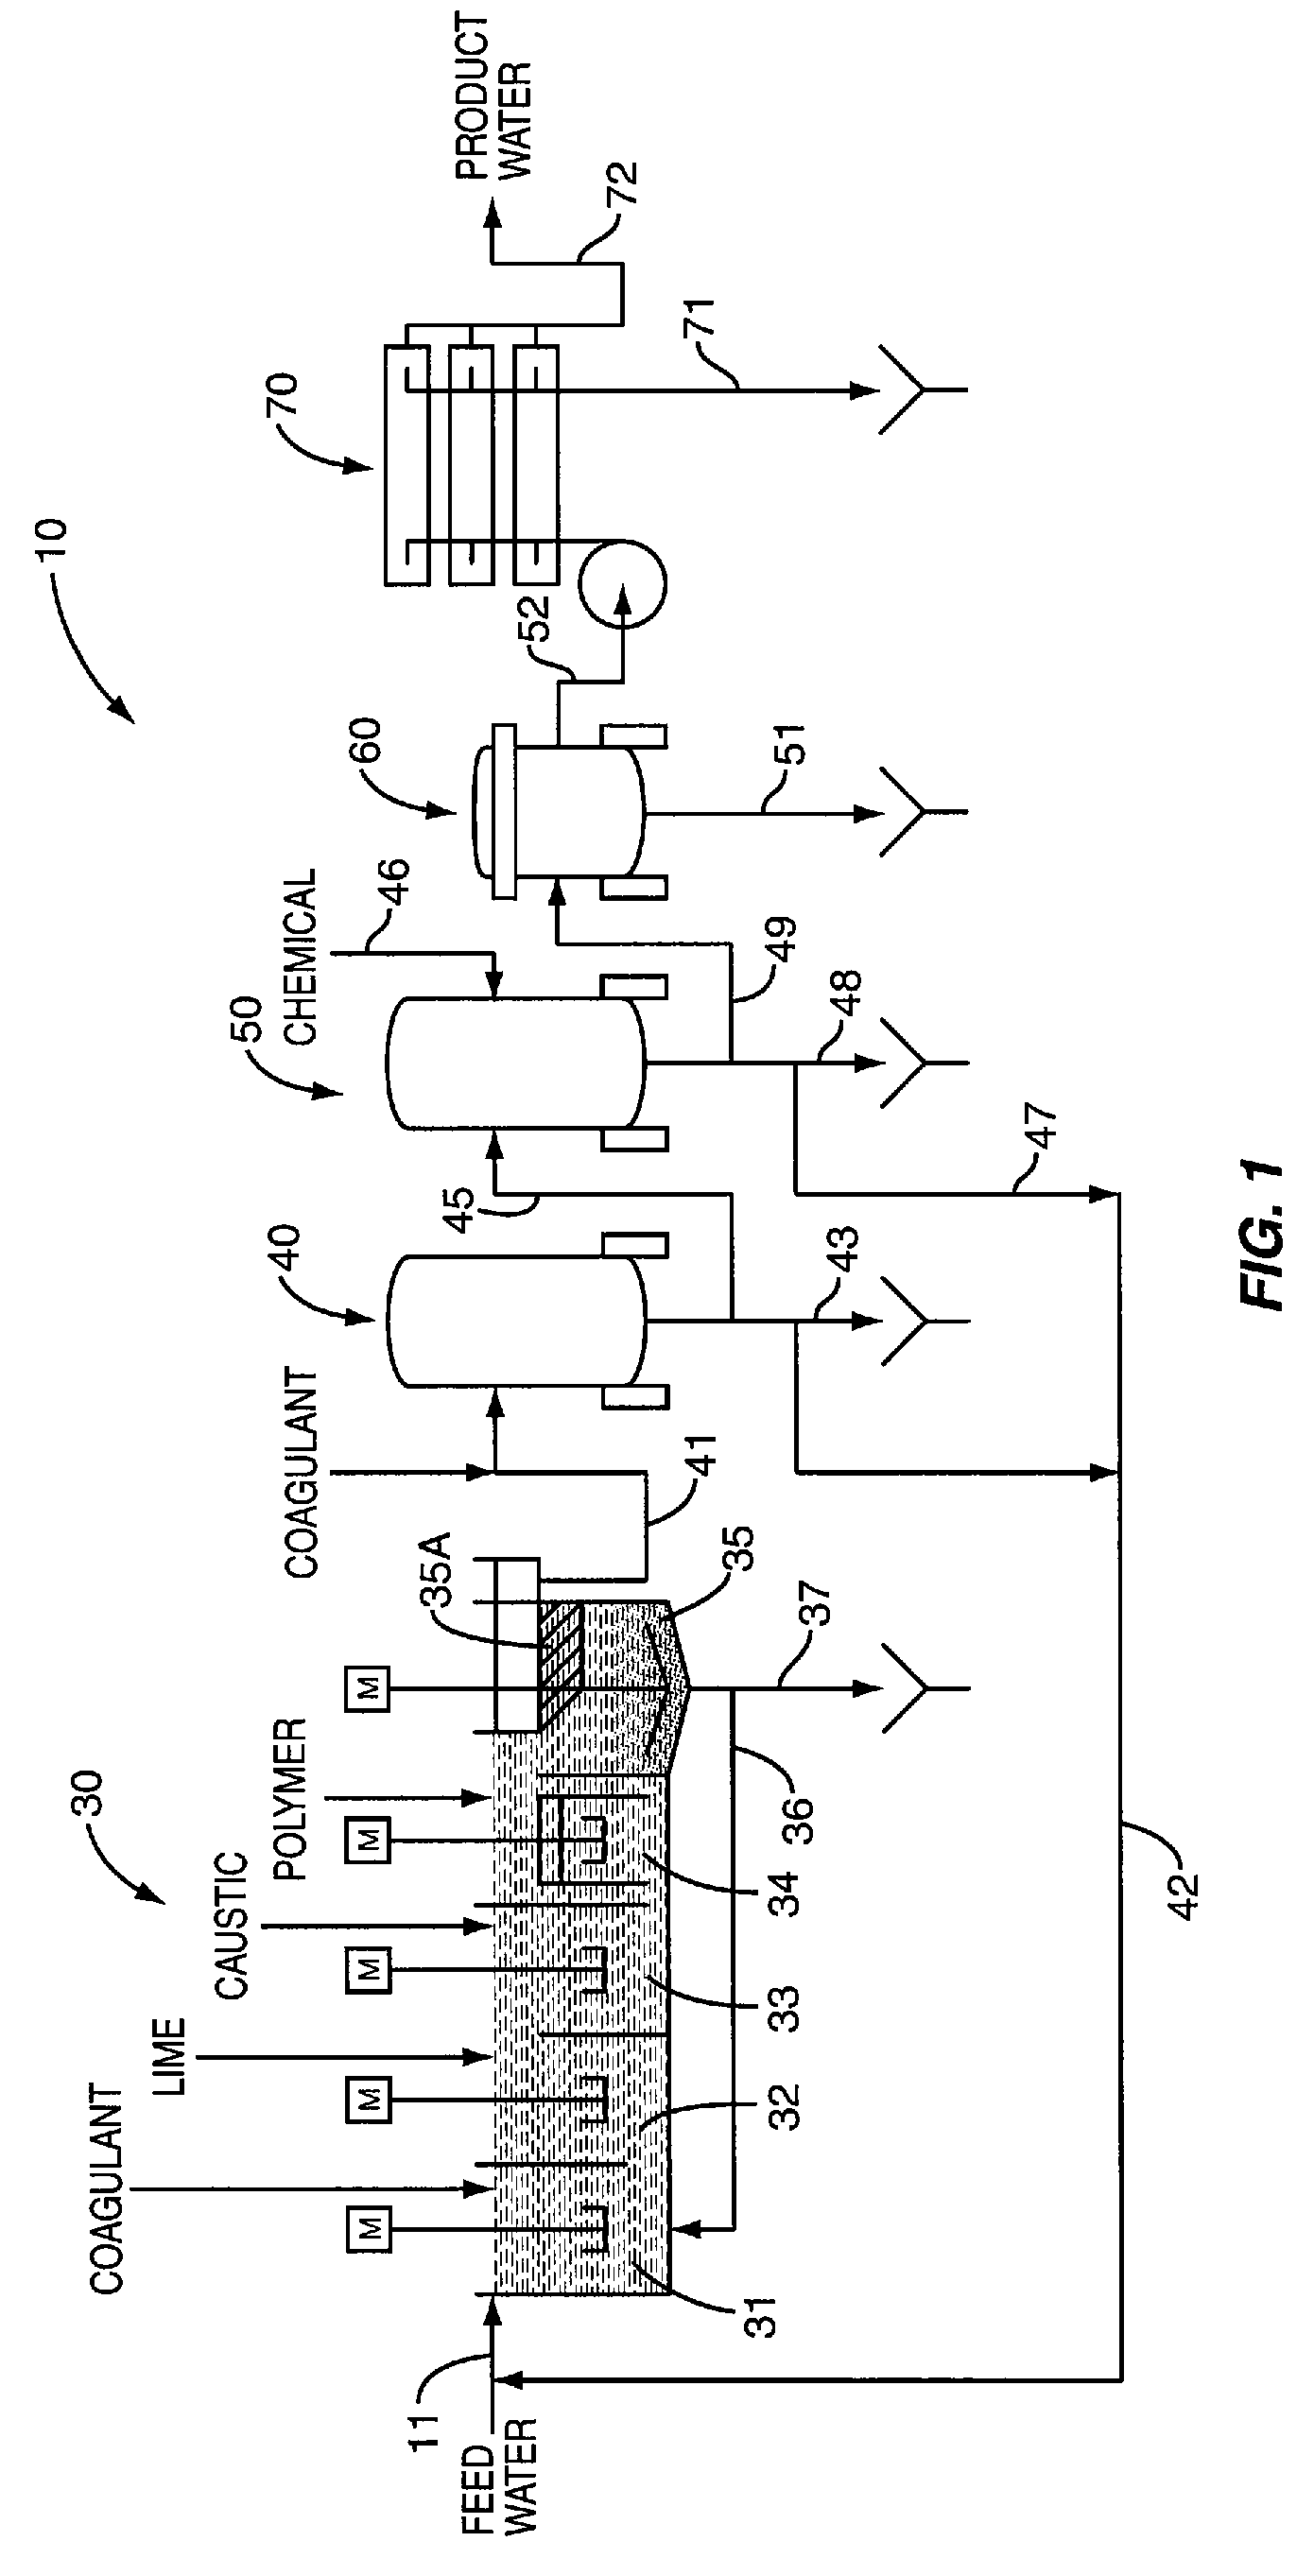 Method for treating wastewater or produced water